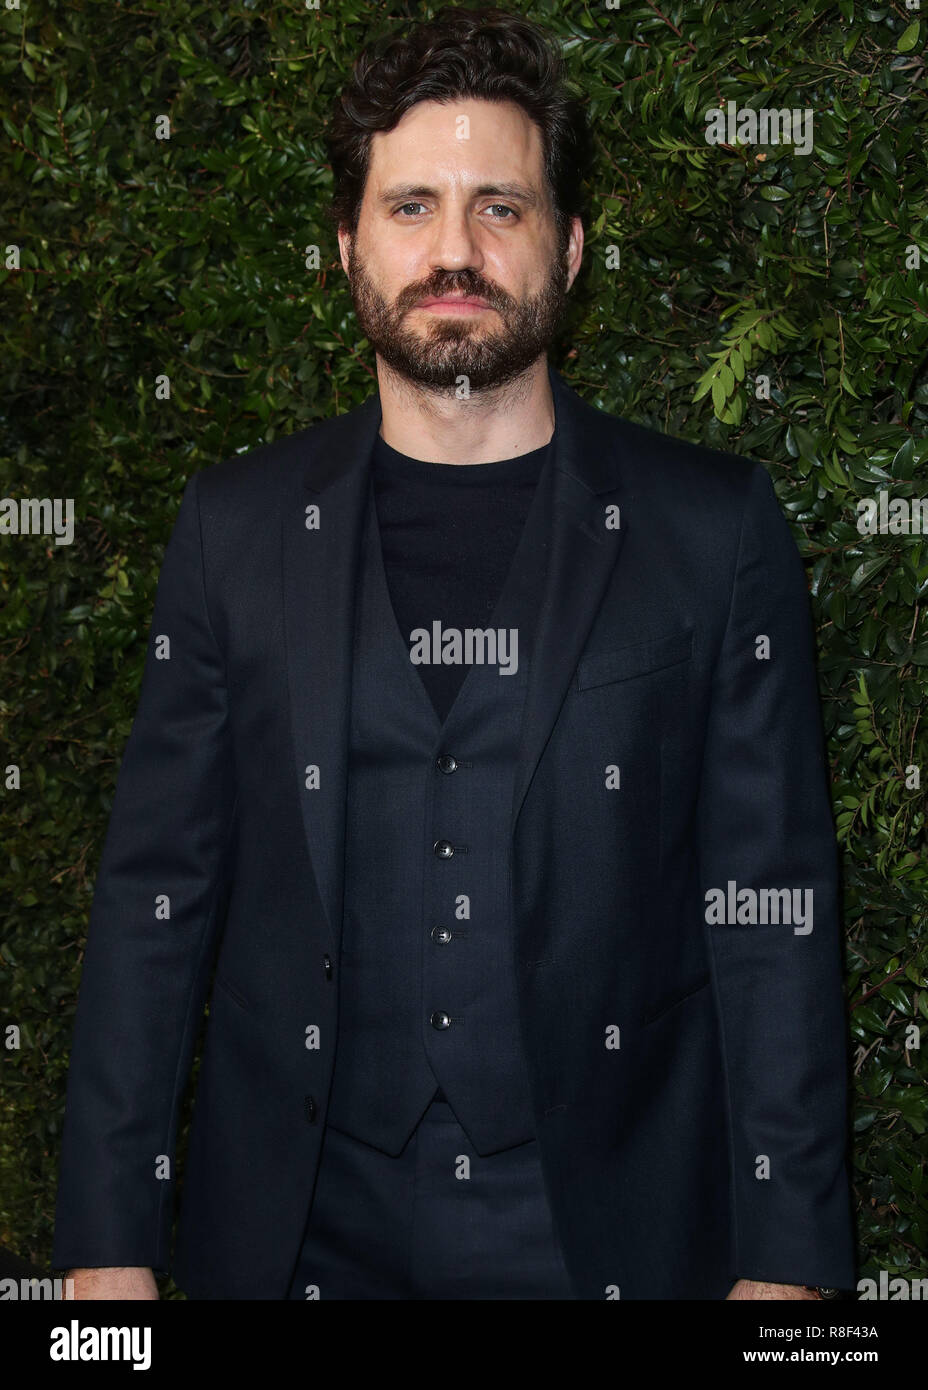 BEVERLY HILLS, LOS ANGELES, CA, USA - MARCH 03: Edgar Ramirez at the Chanel And Charles Finch Pre-Oscar Awards Dinner 2018 held at Madeo Restaurant on March 3, 2018 in Beverly Hills, Los Angeles, California, United States. (Photo by Xavier Collin/Image Press Agency) Stock Photo